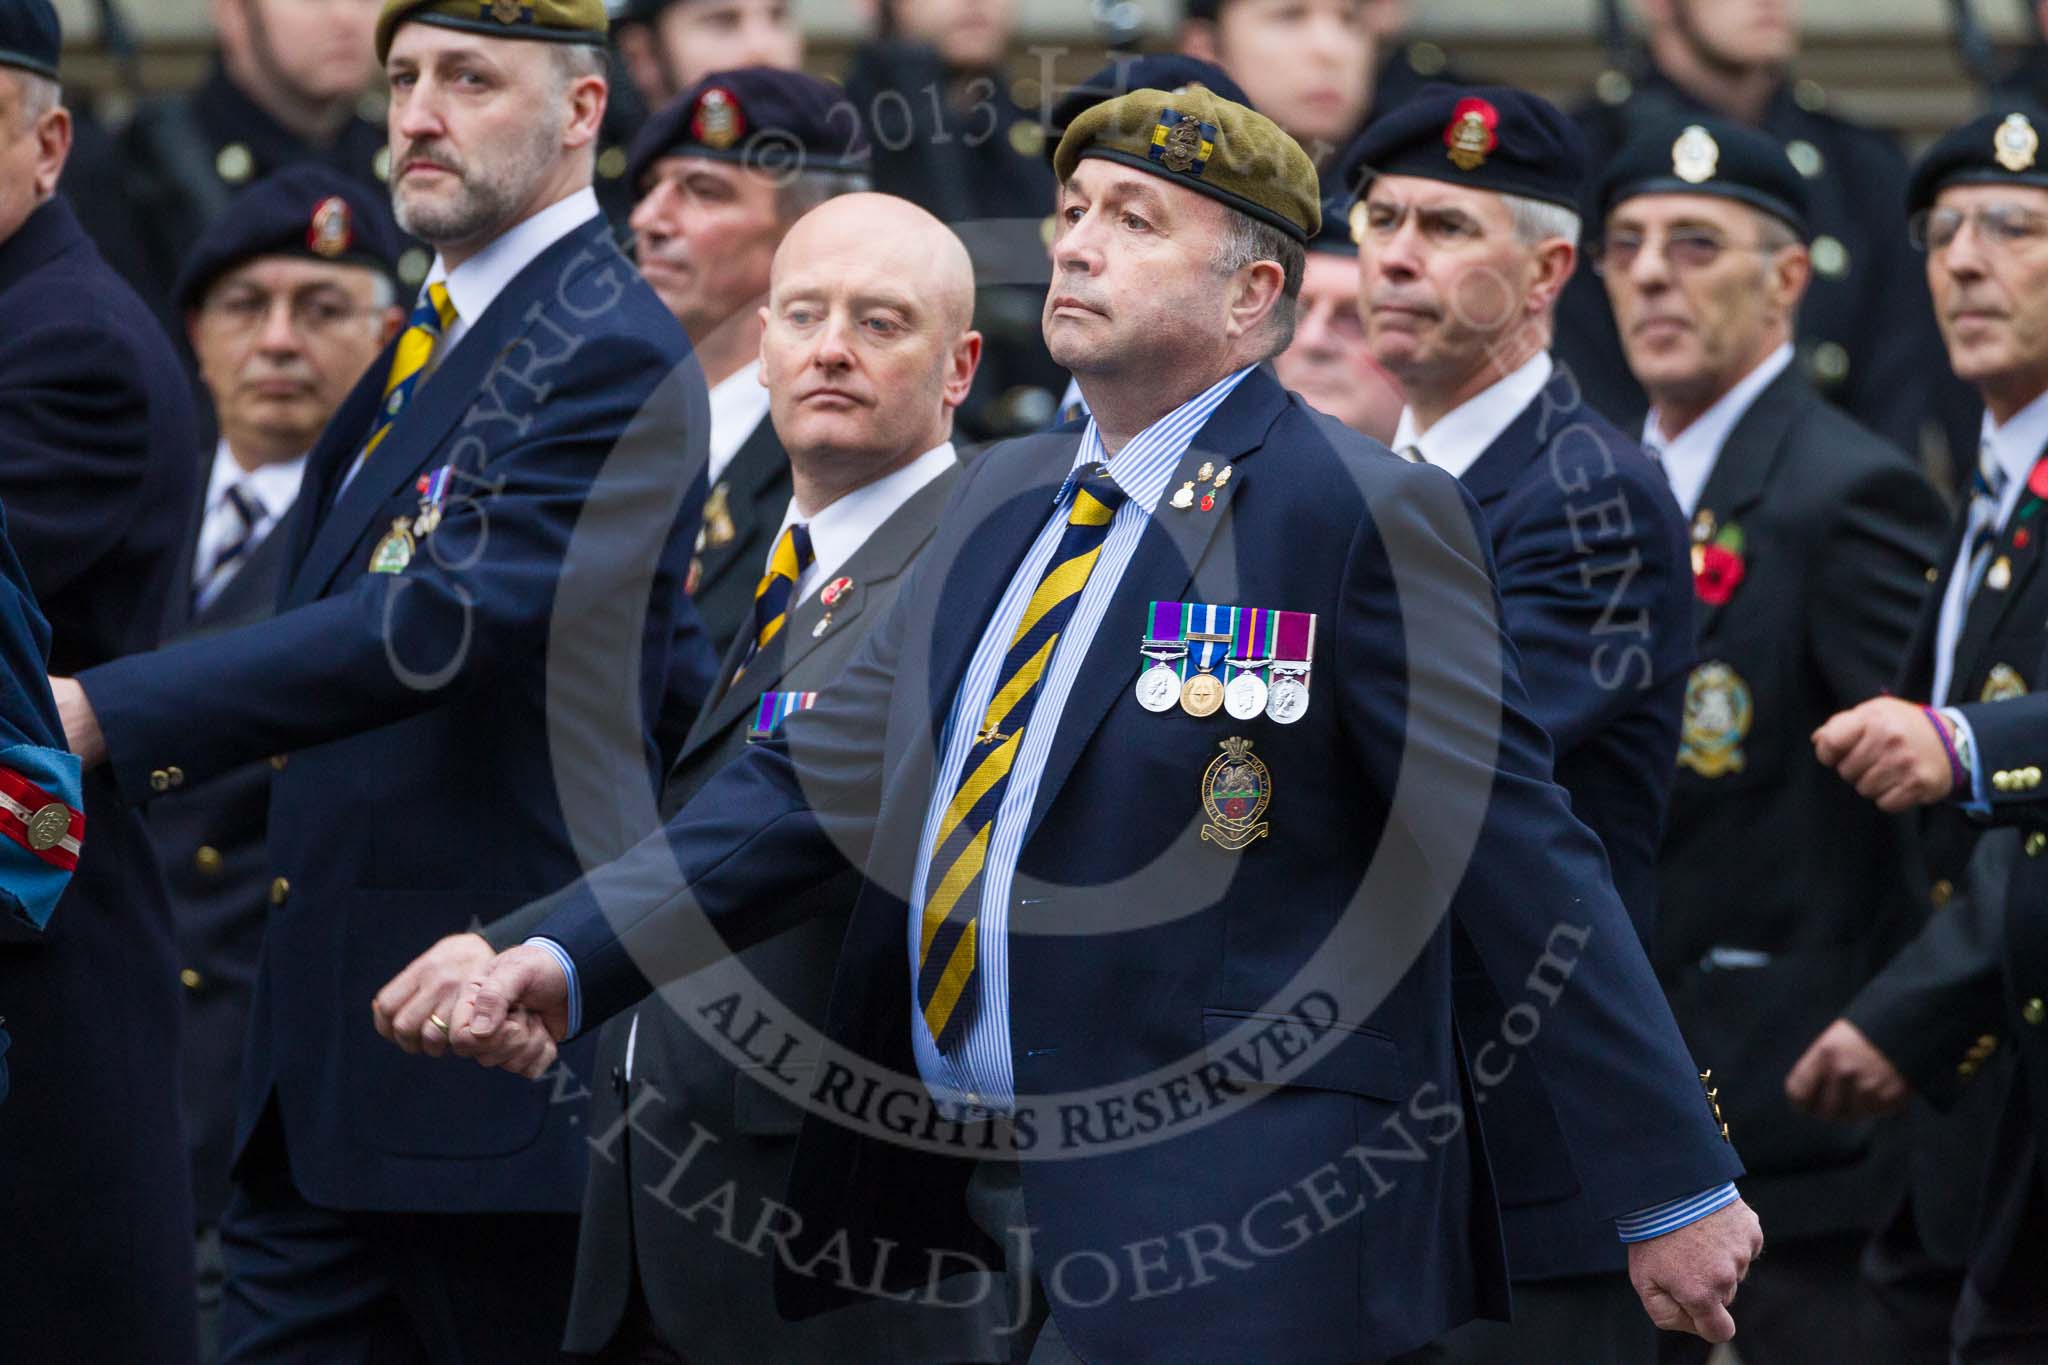 Remembrance Sunday at the Cenotaph 2015: Group A14, 4 Company Association (Parachute Regiment).
Cenotaph, Whitehall, London SW1,
London,
Greater London,
United Kingdom,
on 08 November 2015 at 12:11, image #1301